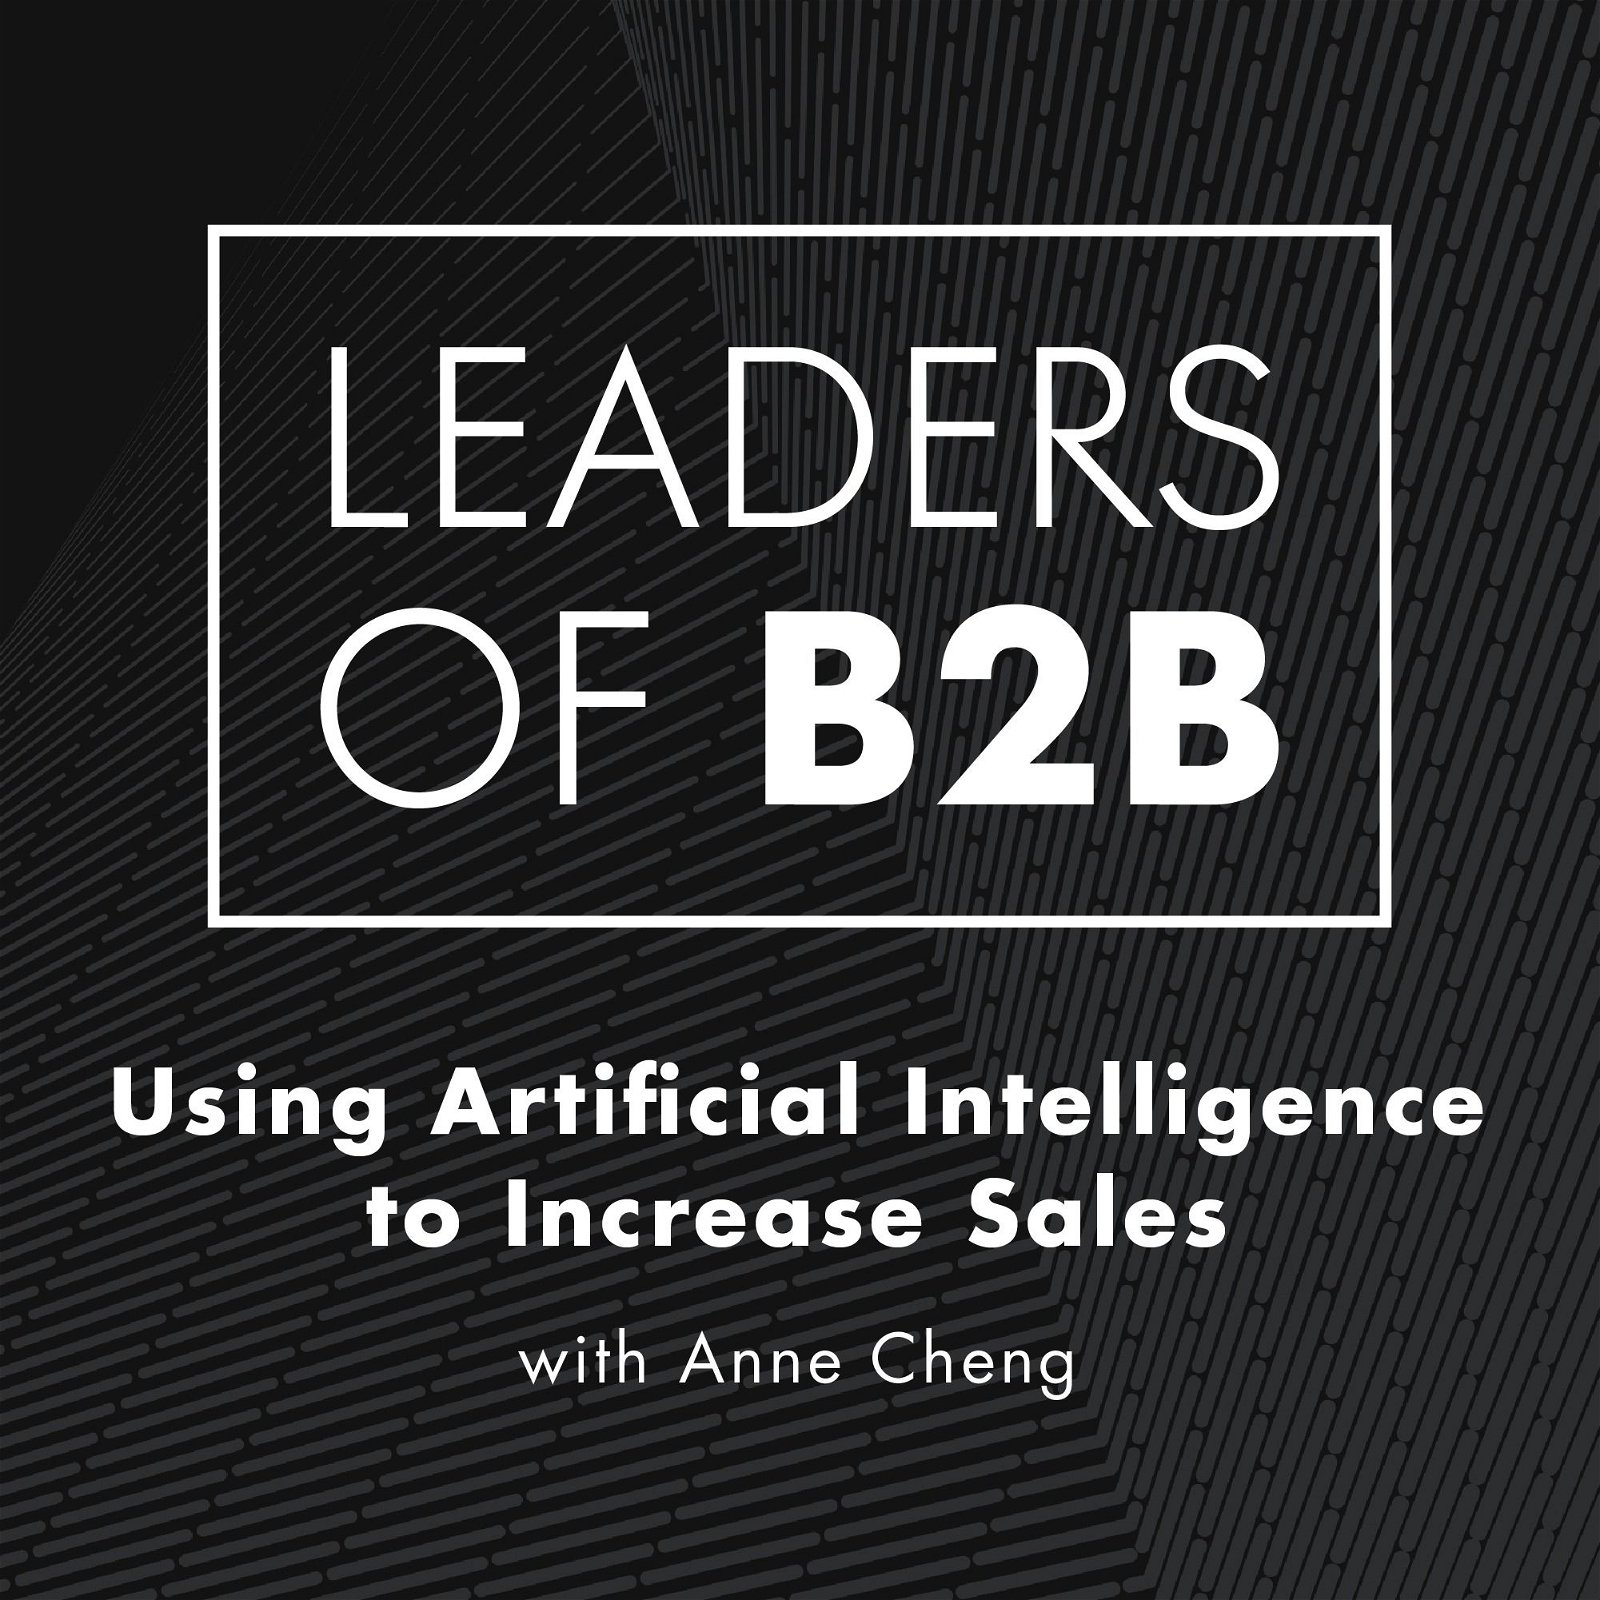 Using Artificial Intelligence to Increase Sales with Anne Cheng